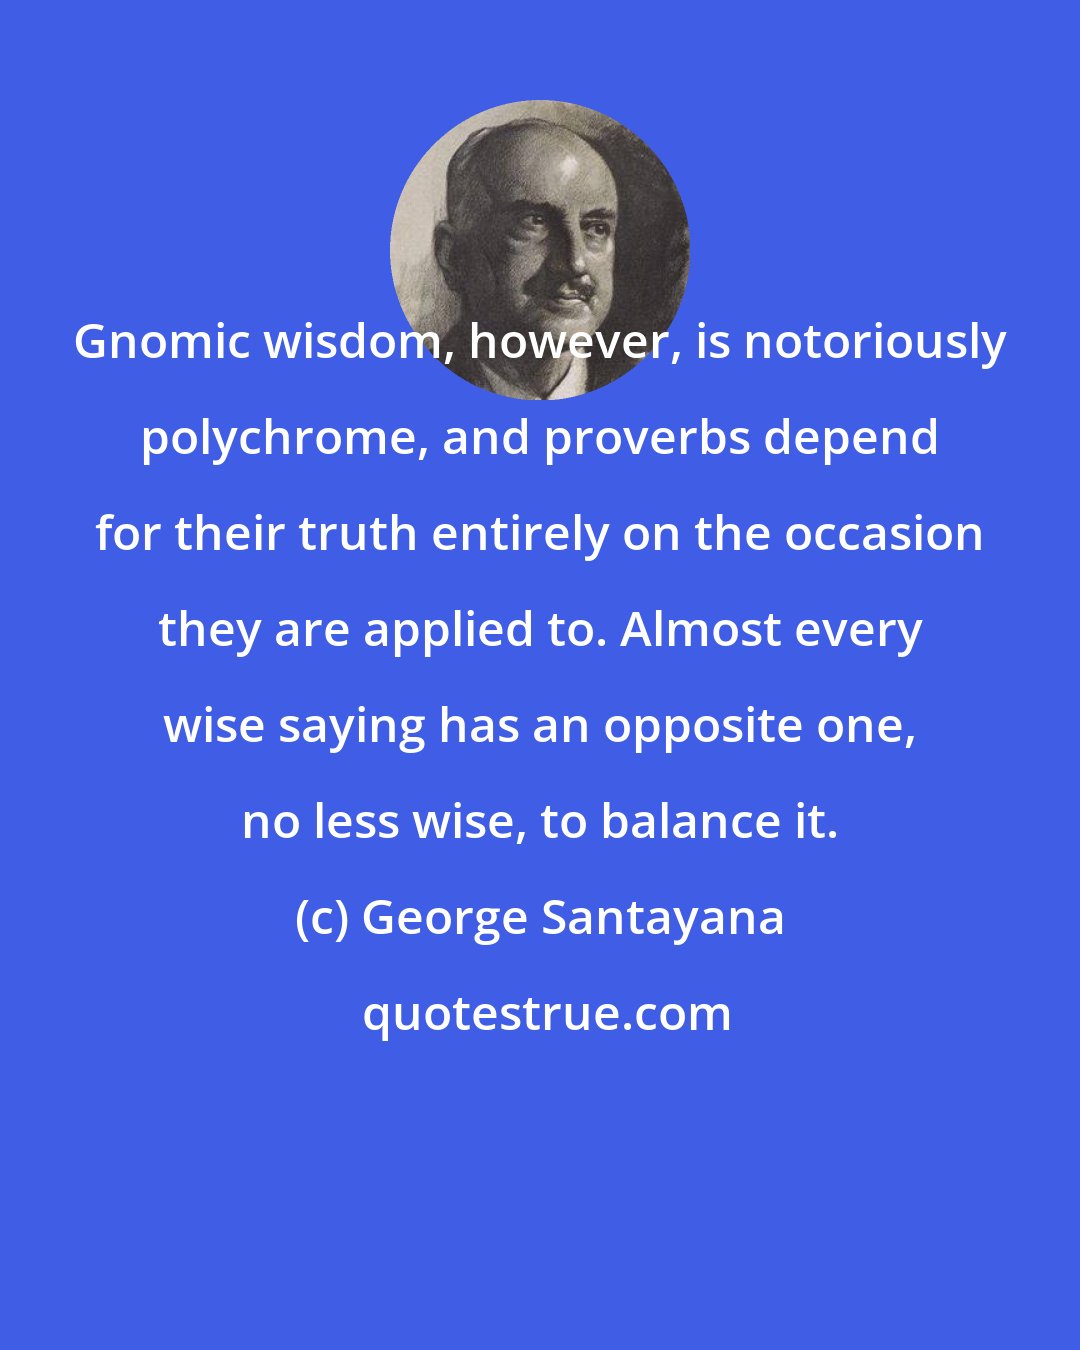 George Santayana: Gnomic wisdom, however, is notoriously polychrome, and proverbs depend for their truth entirely on the occasion they are applied to. Almost every wise saying has an opposite one, no less wise, to balance it.